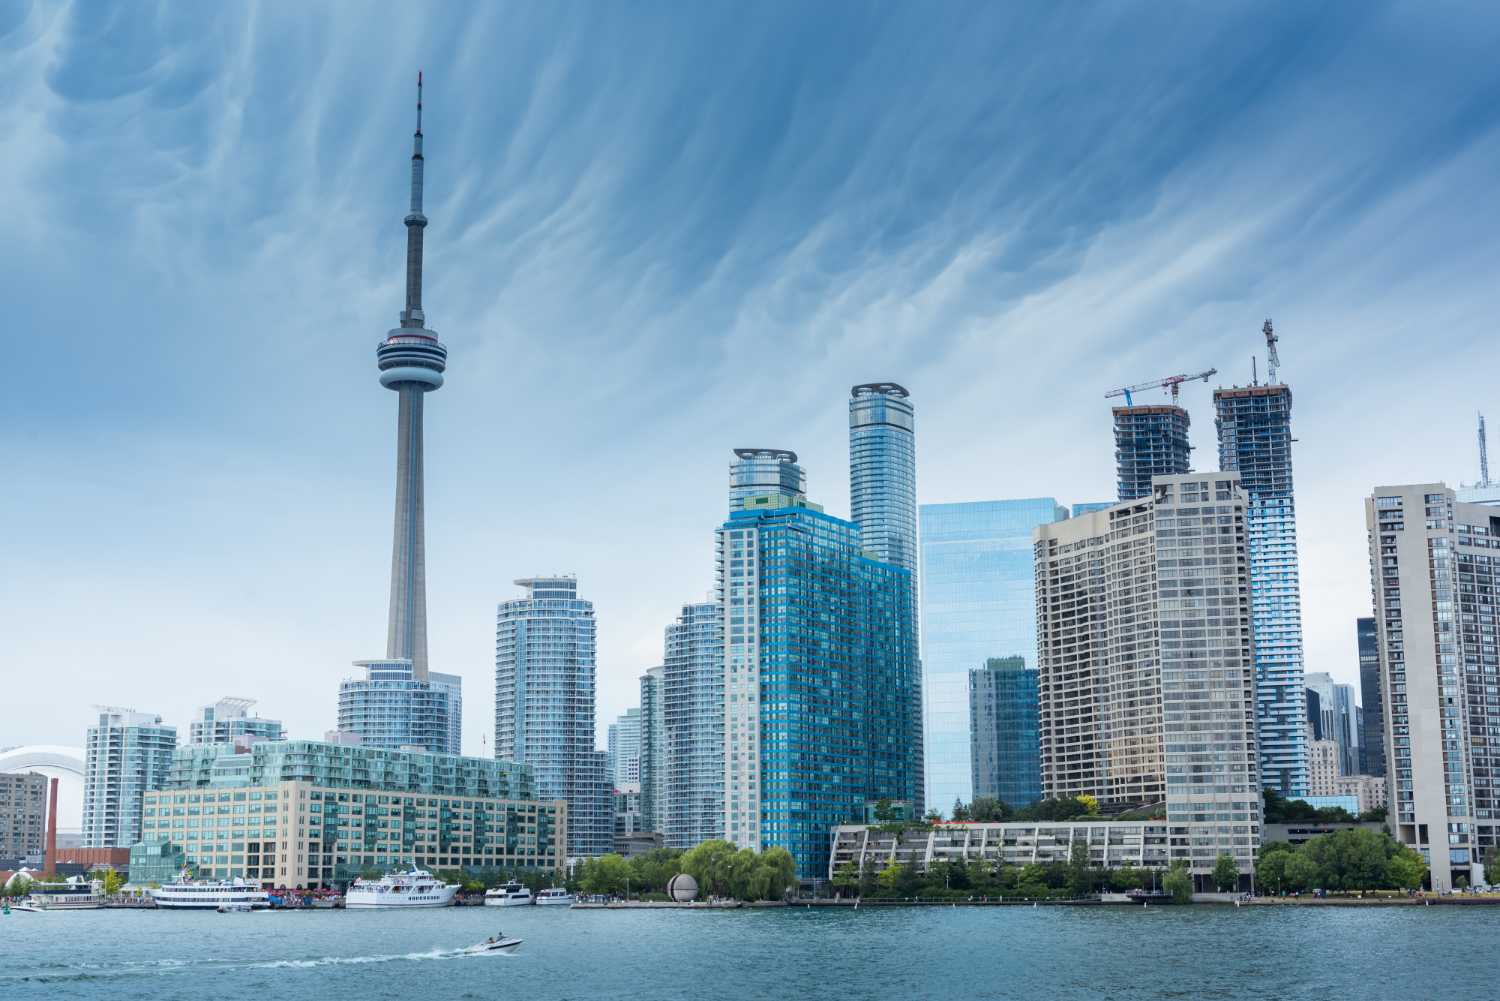 Hotels in Toronto are waiting for you to discover the city's beauty! Find the best hotel deals.